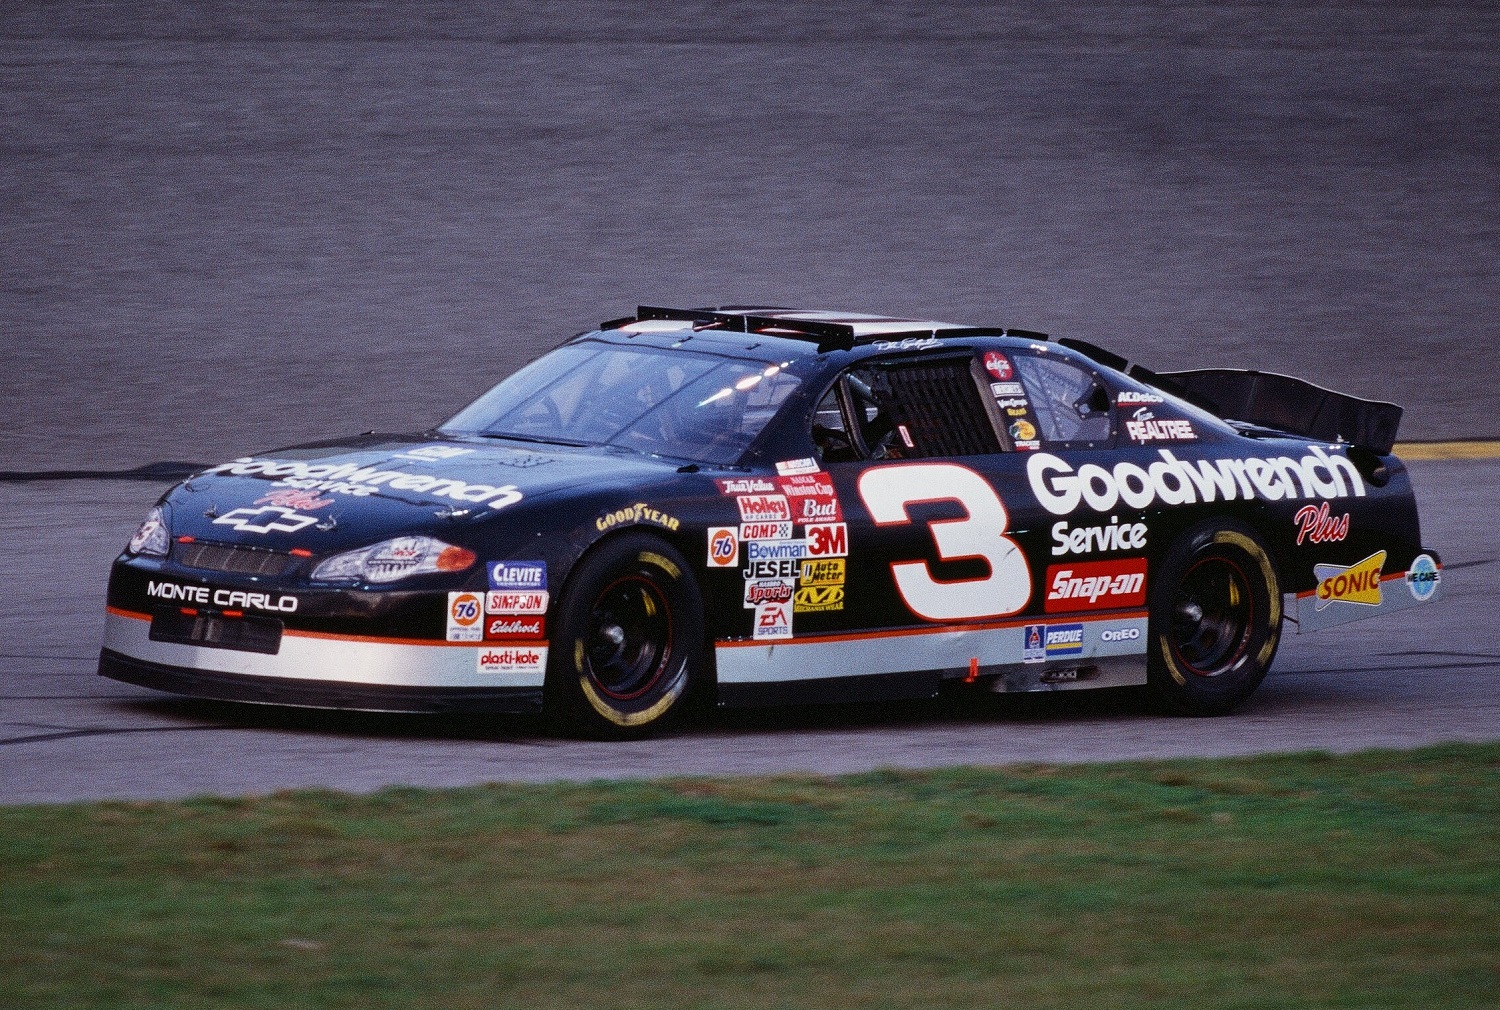 Dale Earnhardt drives his No. 3 Chevrolet during practice for the Daytona 500 on Feb. 17, 2001.